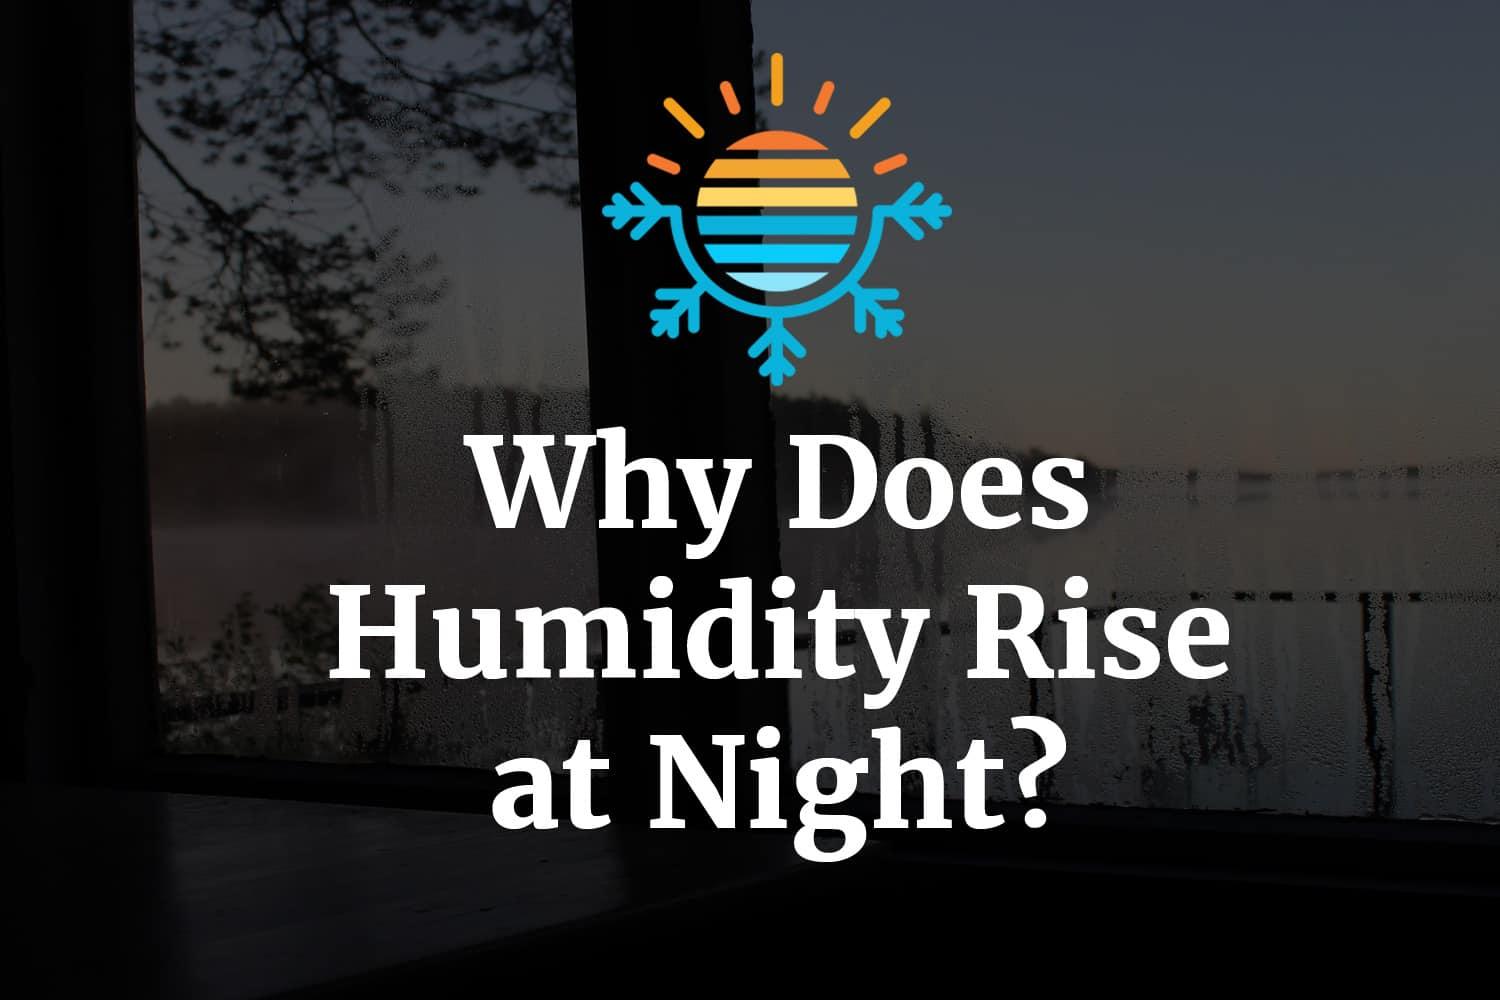 Why does humidity rise at night